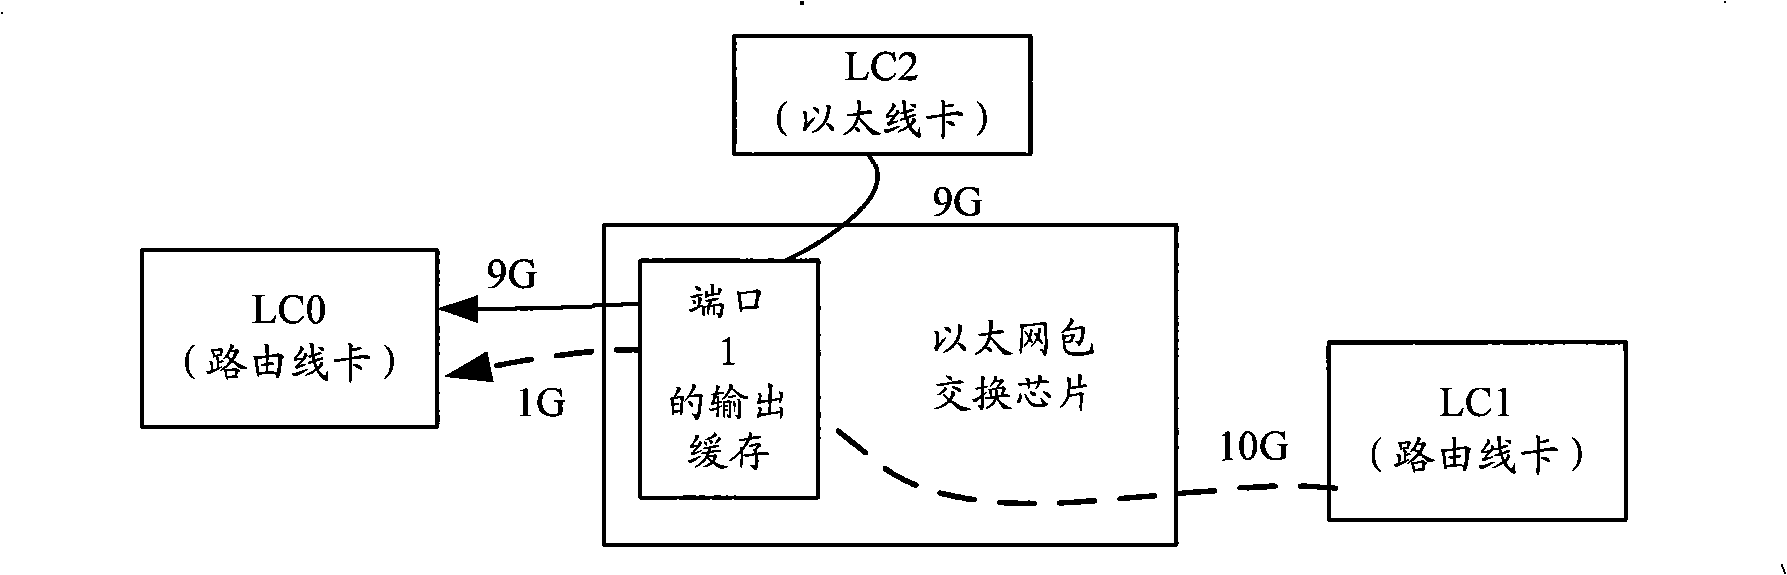 Method for switching message of switching network, switching device, route line card and Ether line card